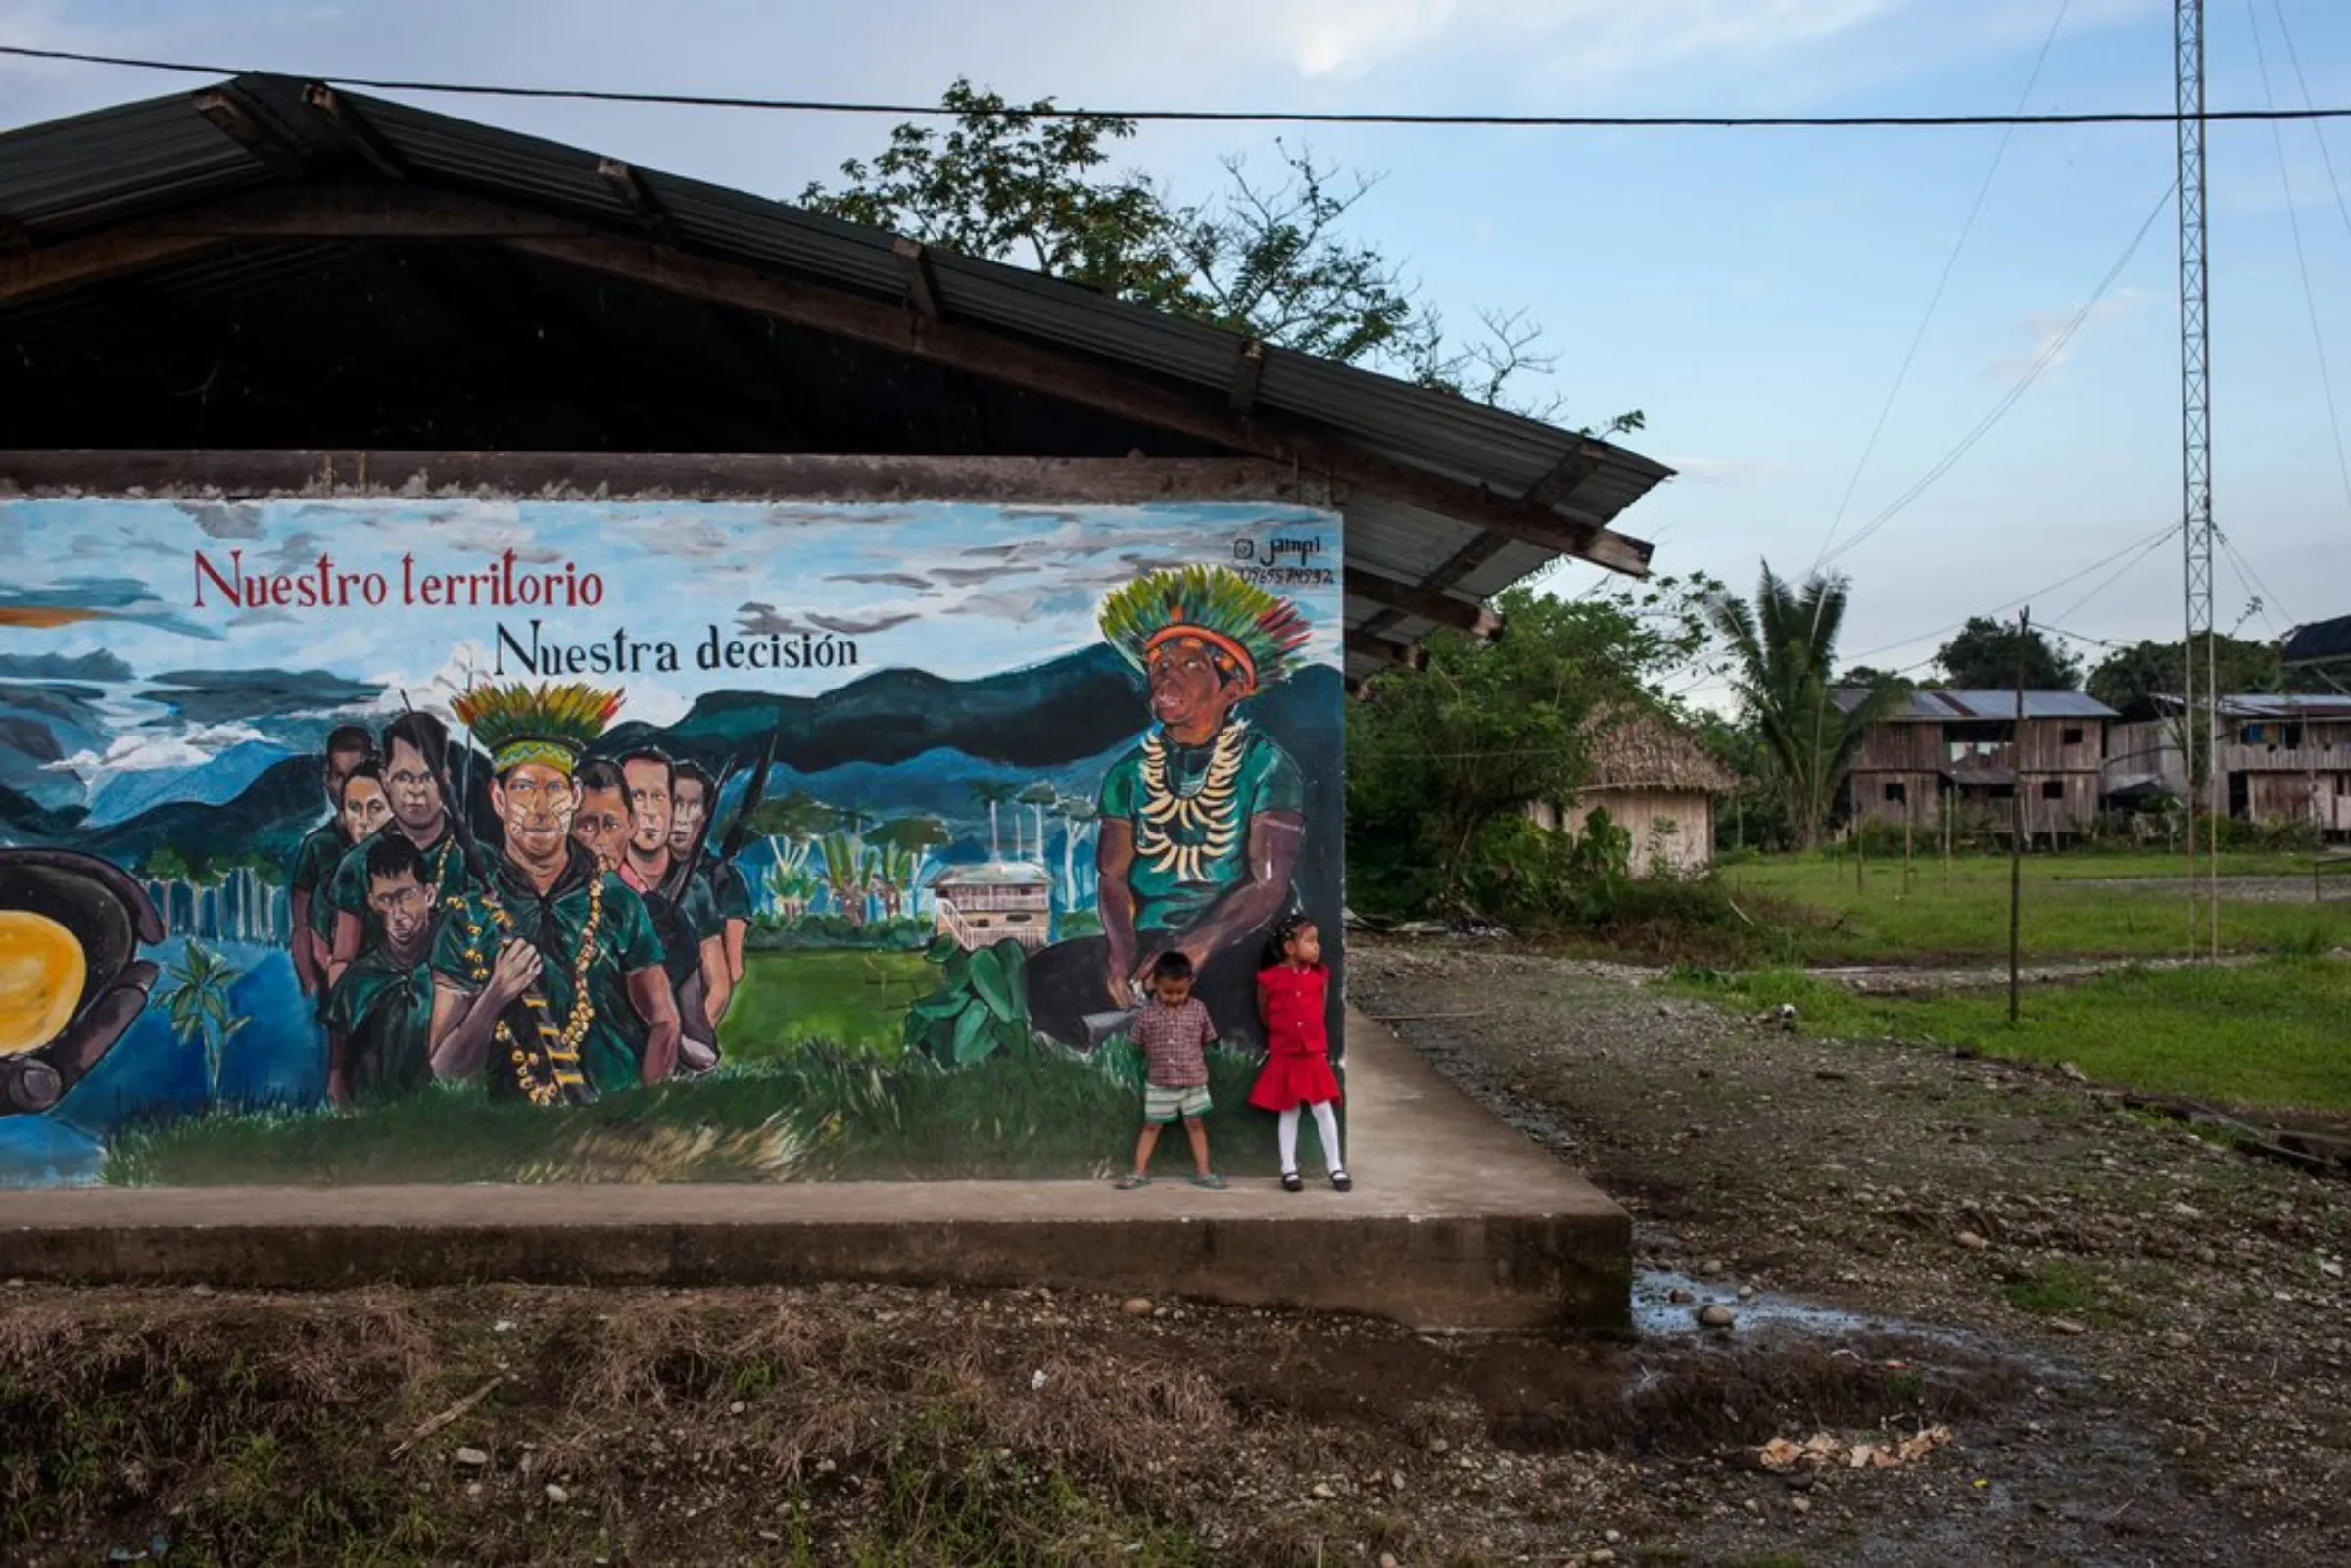 Children stand near a painted mural with the slogan, 'Our territory, our decision' at the Cofan village of Sinangoe in Ecuador’s northern rainforest, on April 21, 2022. In February, the Cofan celebrated a rare victory when Ecuador's constitutional court ratified a ruling that had suspended 52 formal gold mining concessions on their lands